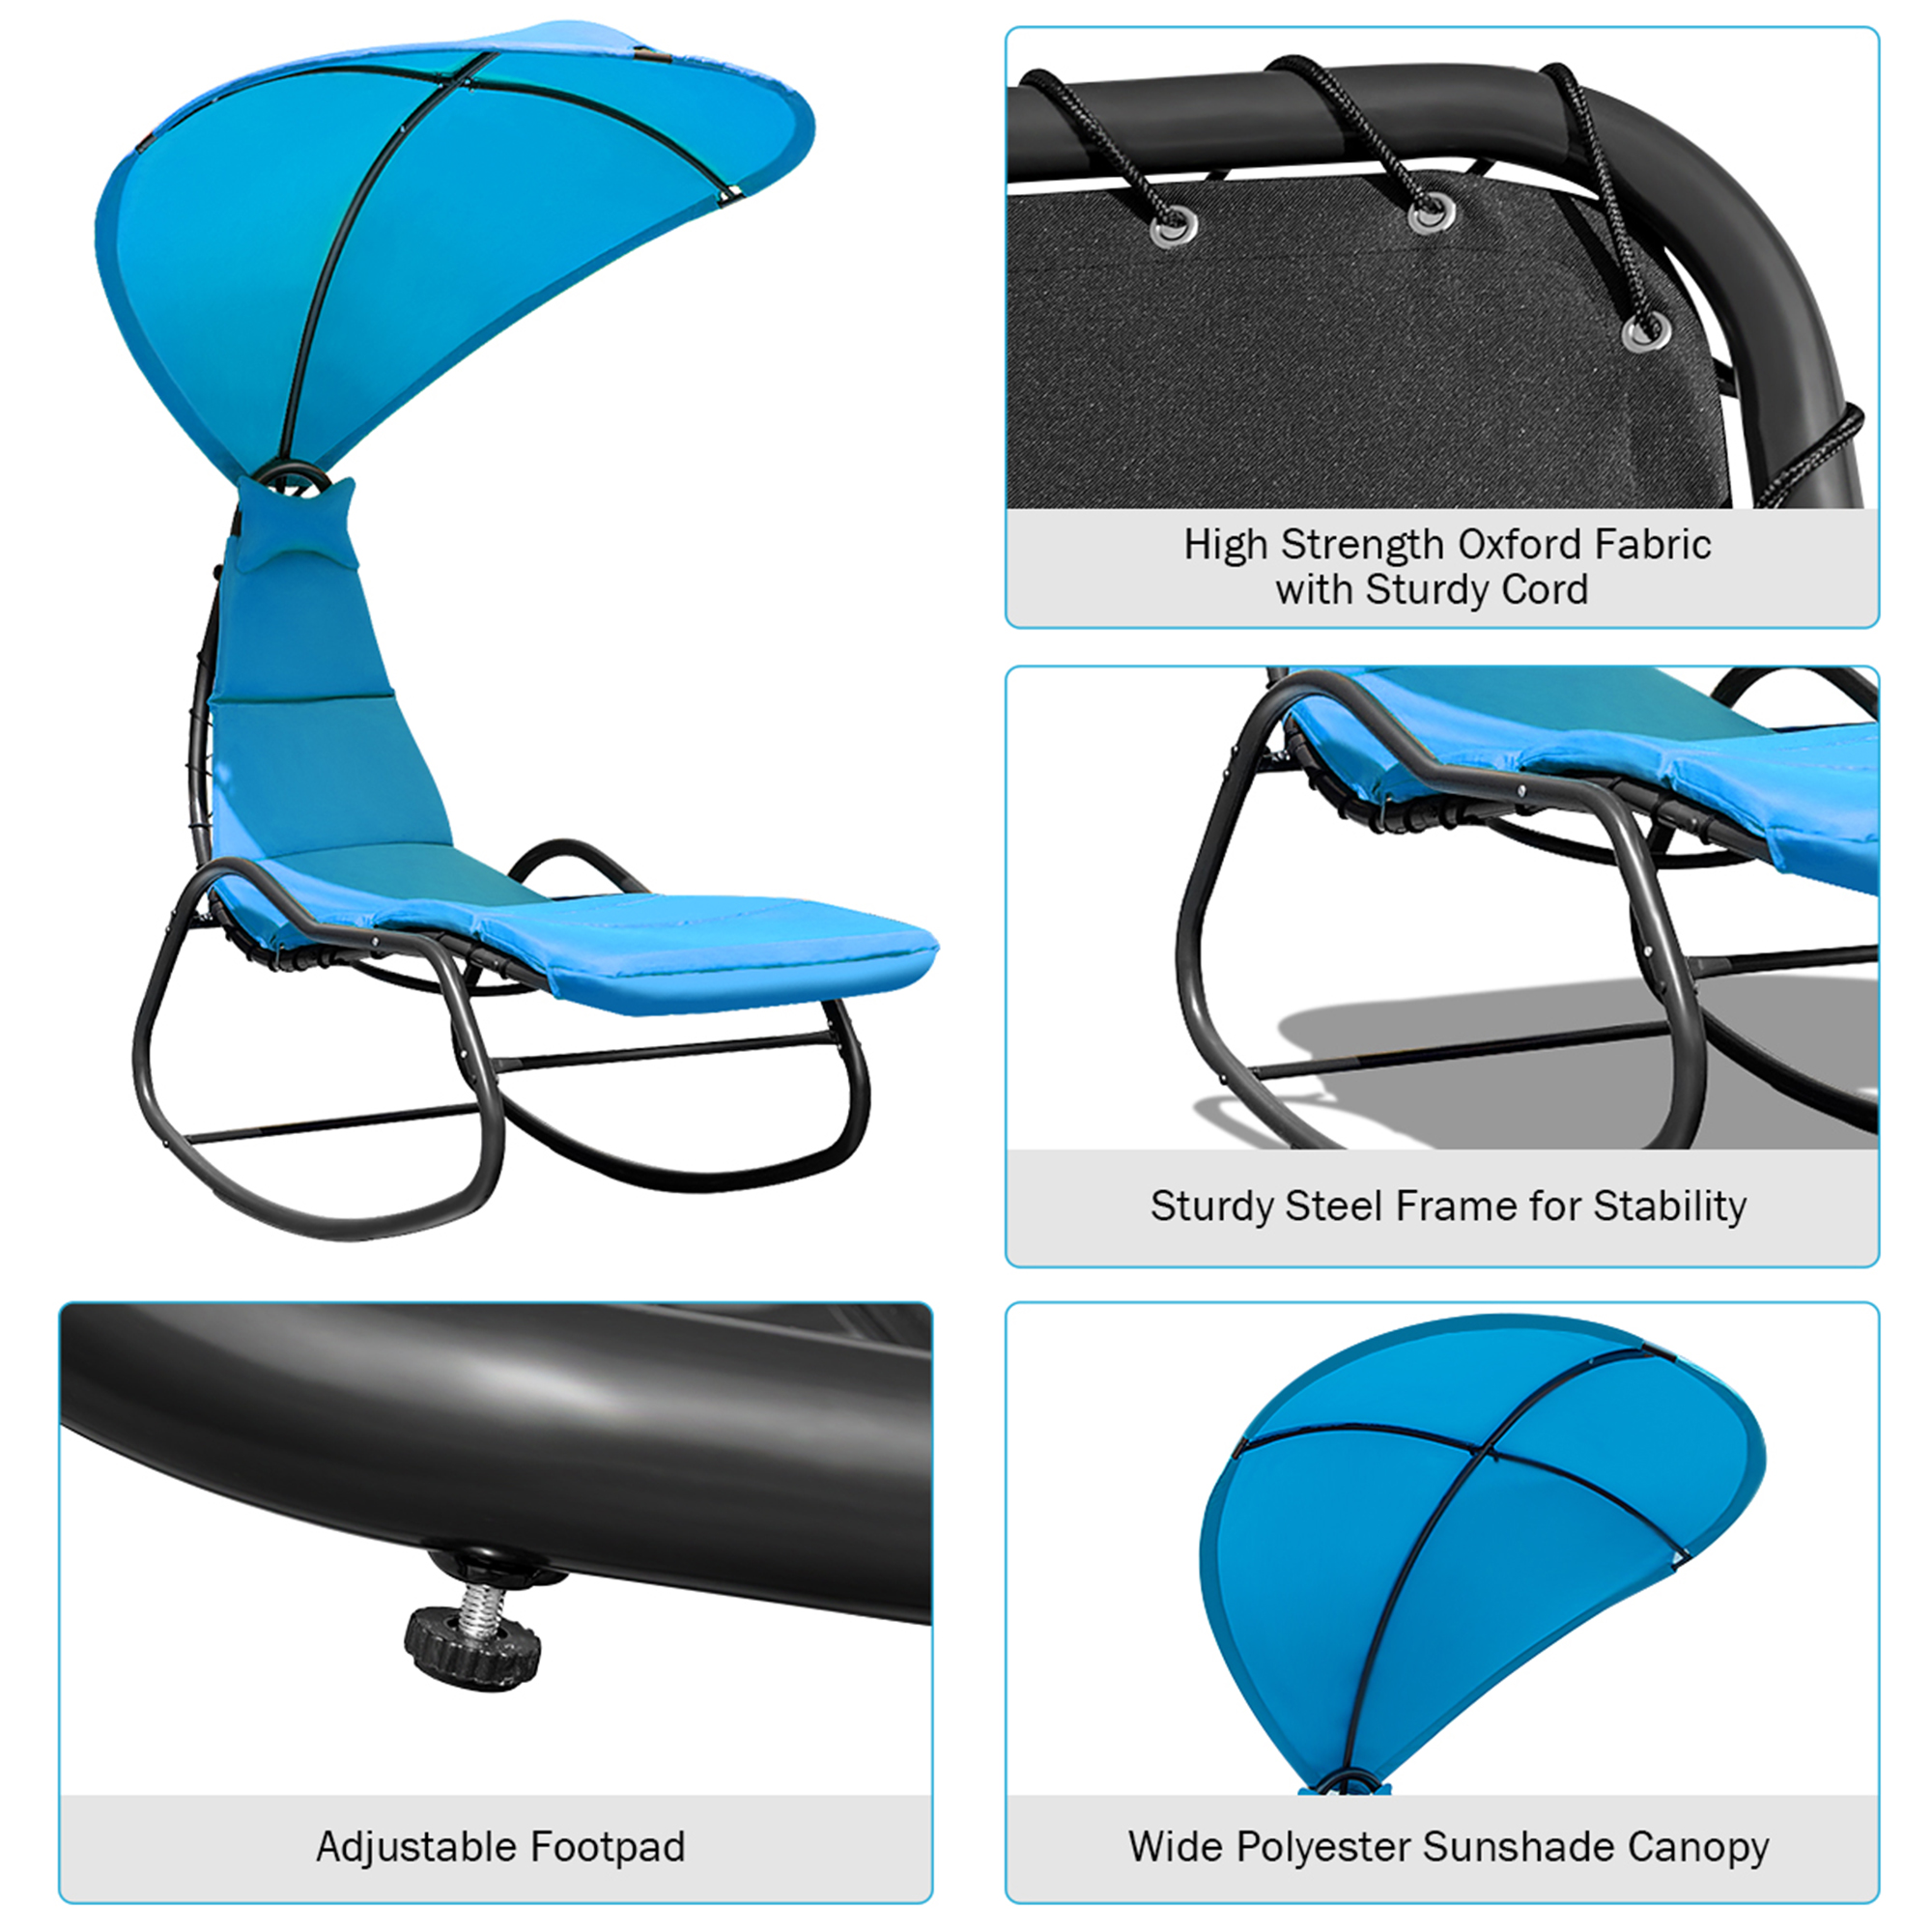 Gymax Patio Lounge Chair Chaise Garden w/ Steel Frame Cushion Canopy Turquoise - image 5 of 9